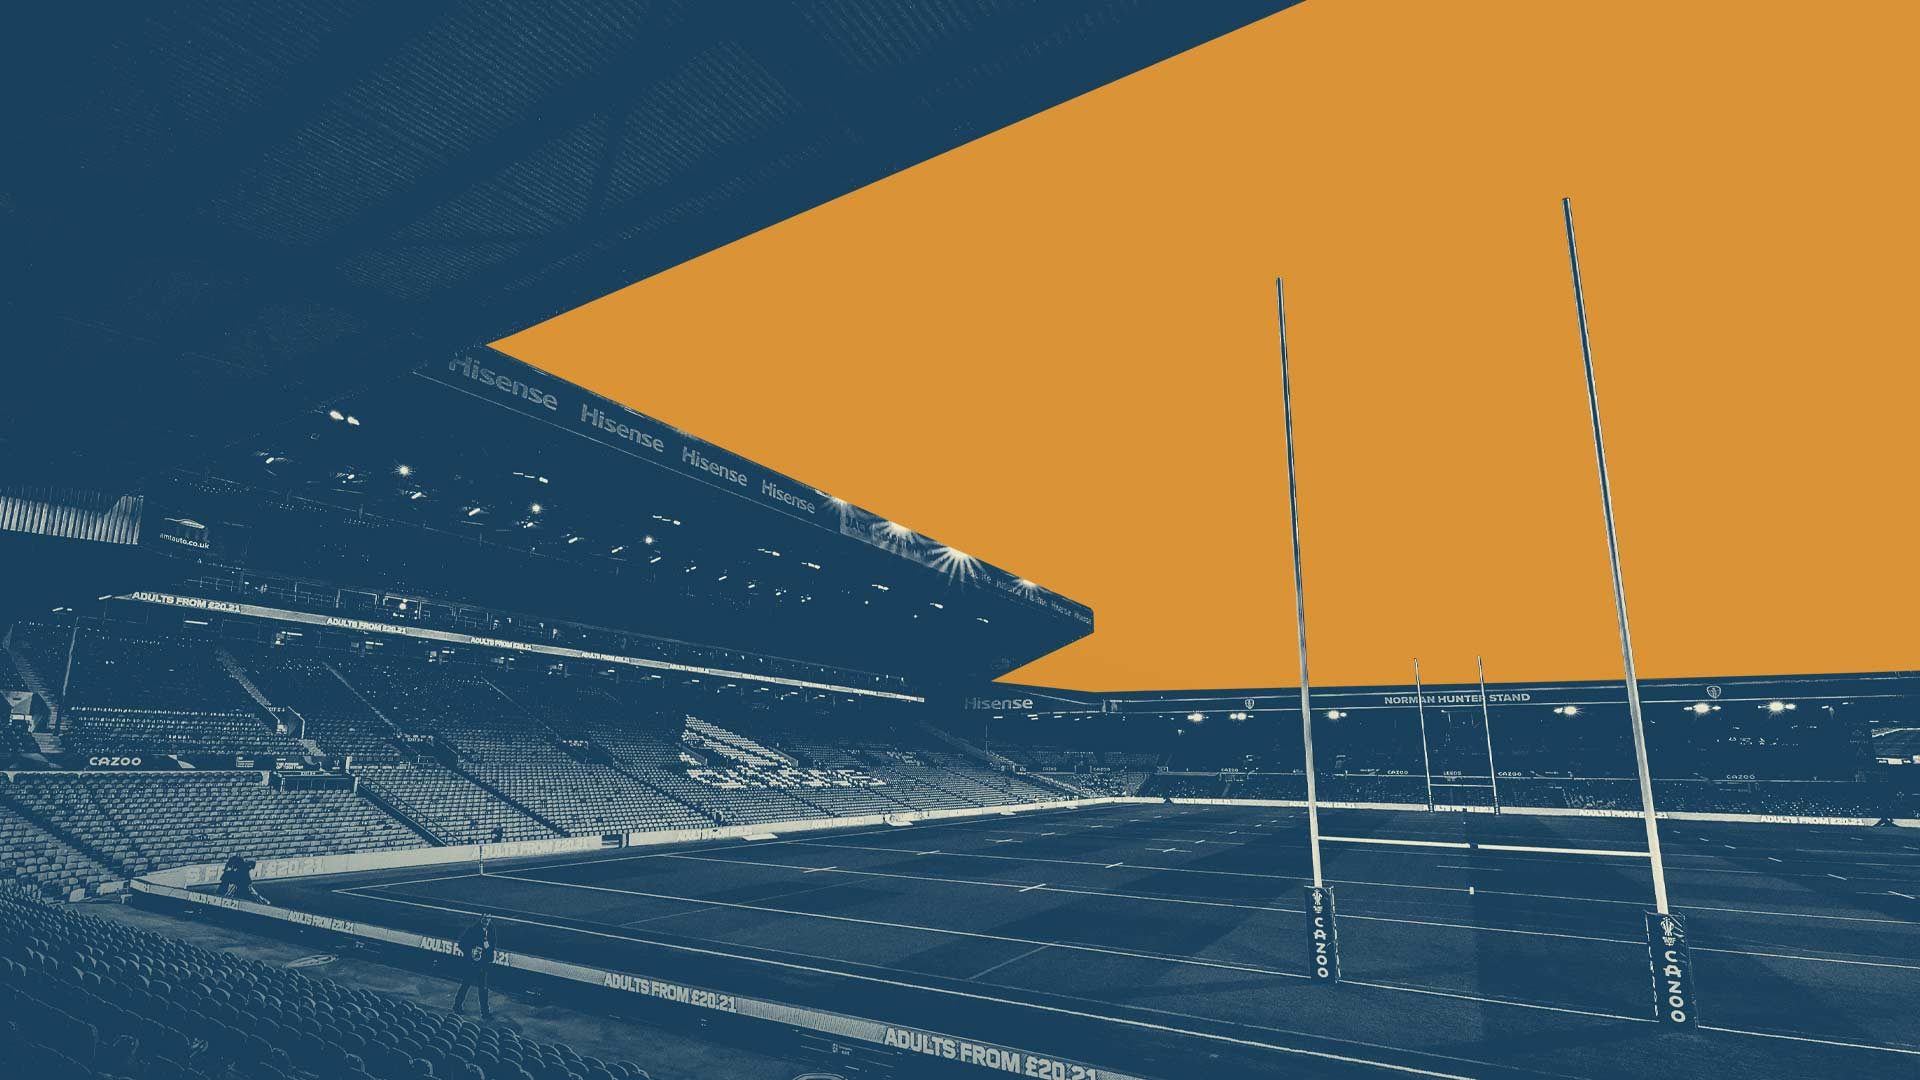 An image of an empty Elland Road with rugby posts erected instead of football posts. The sky has been coloured orangey-yellow and the ground is blue